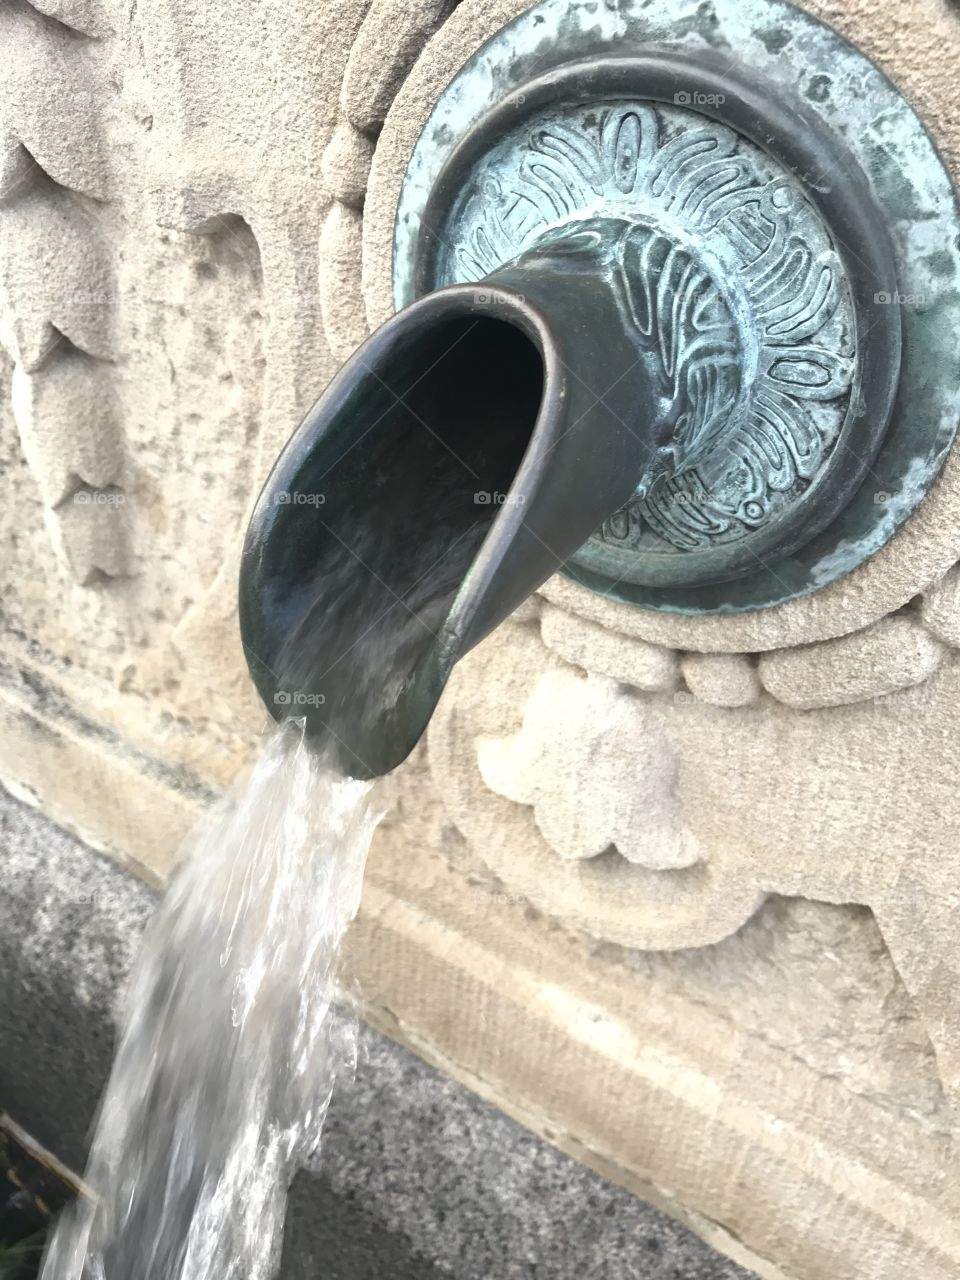 The Water Spout